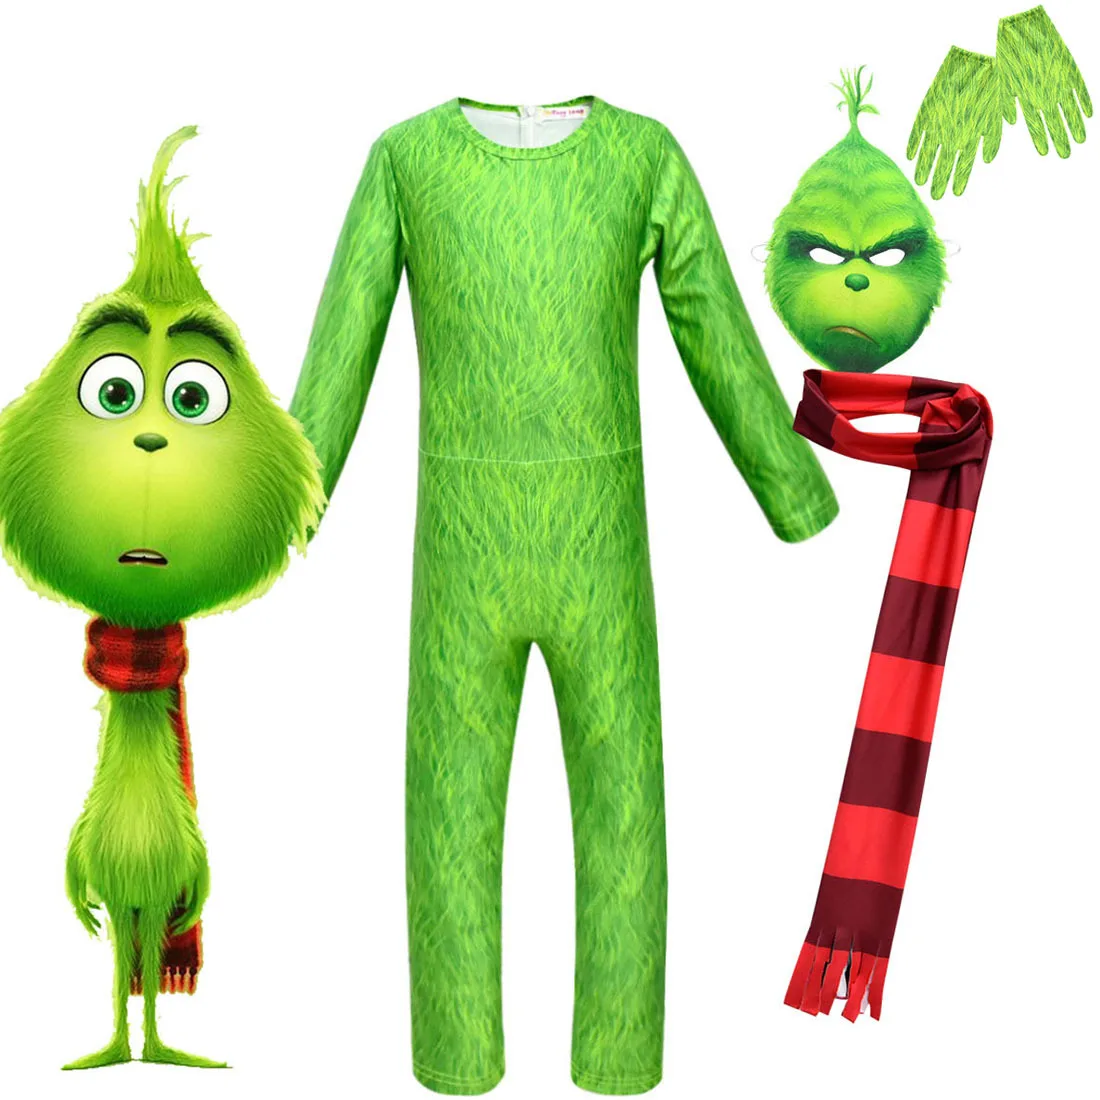 New children cartoon Grinch Christmas costume cosplay green-haired monster jumpsuit for kids Halloween